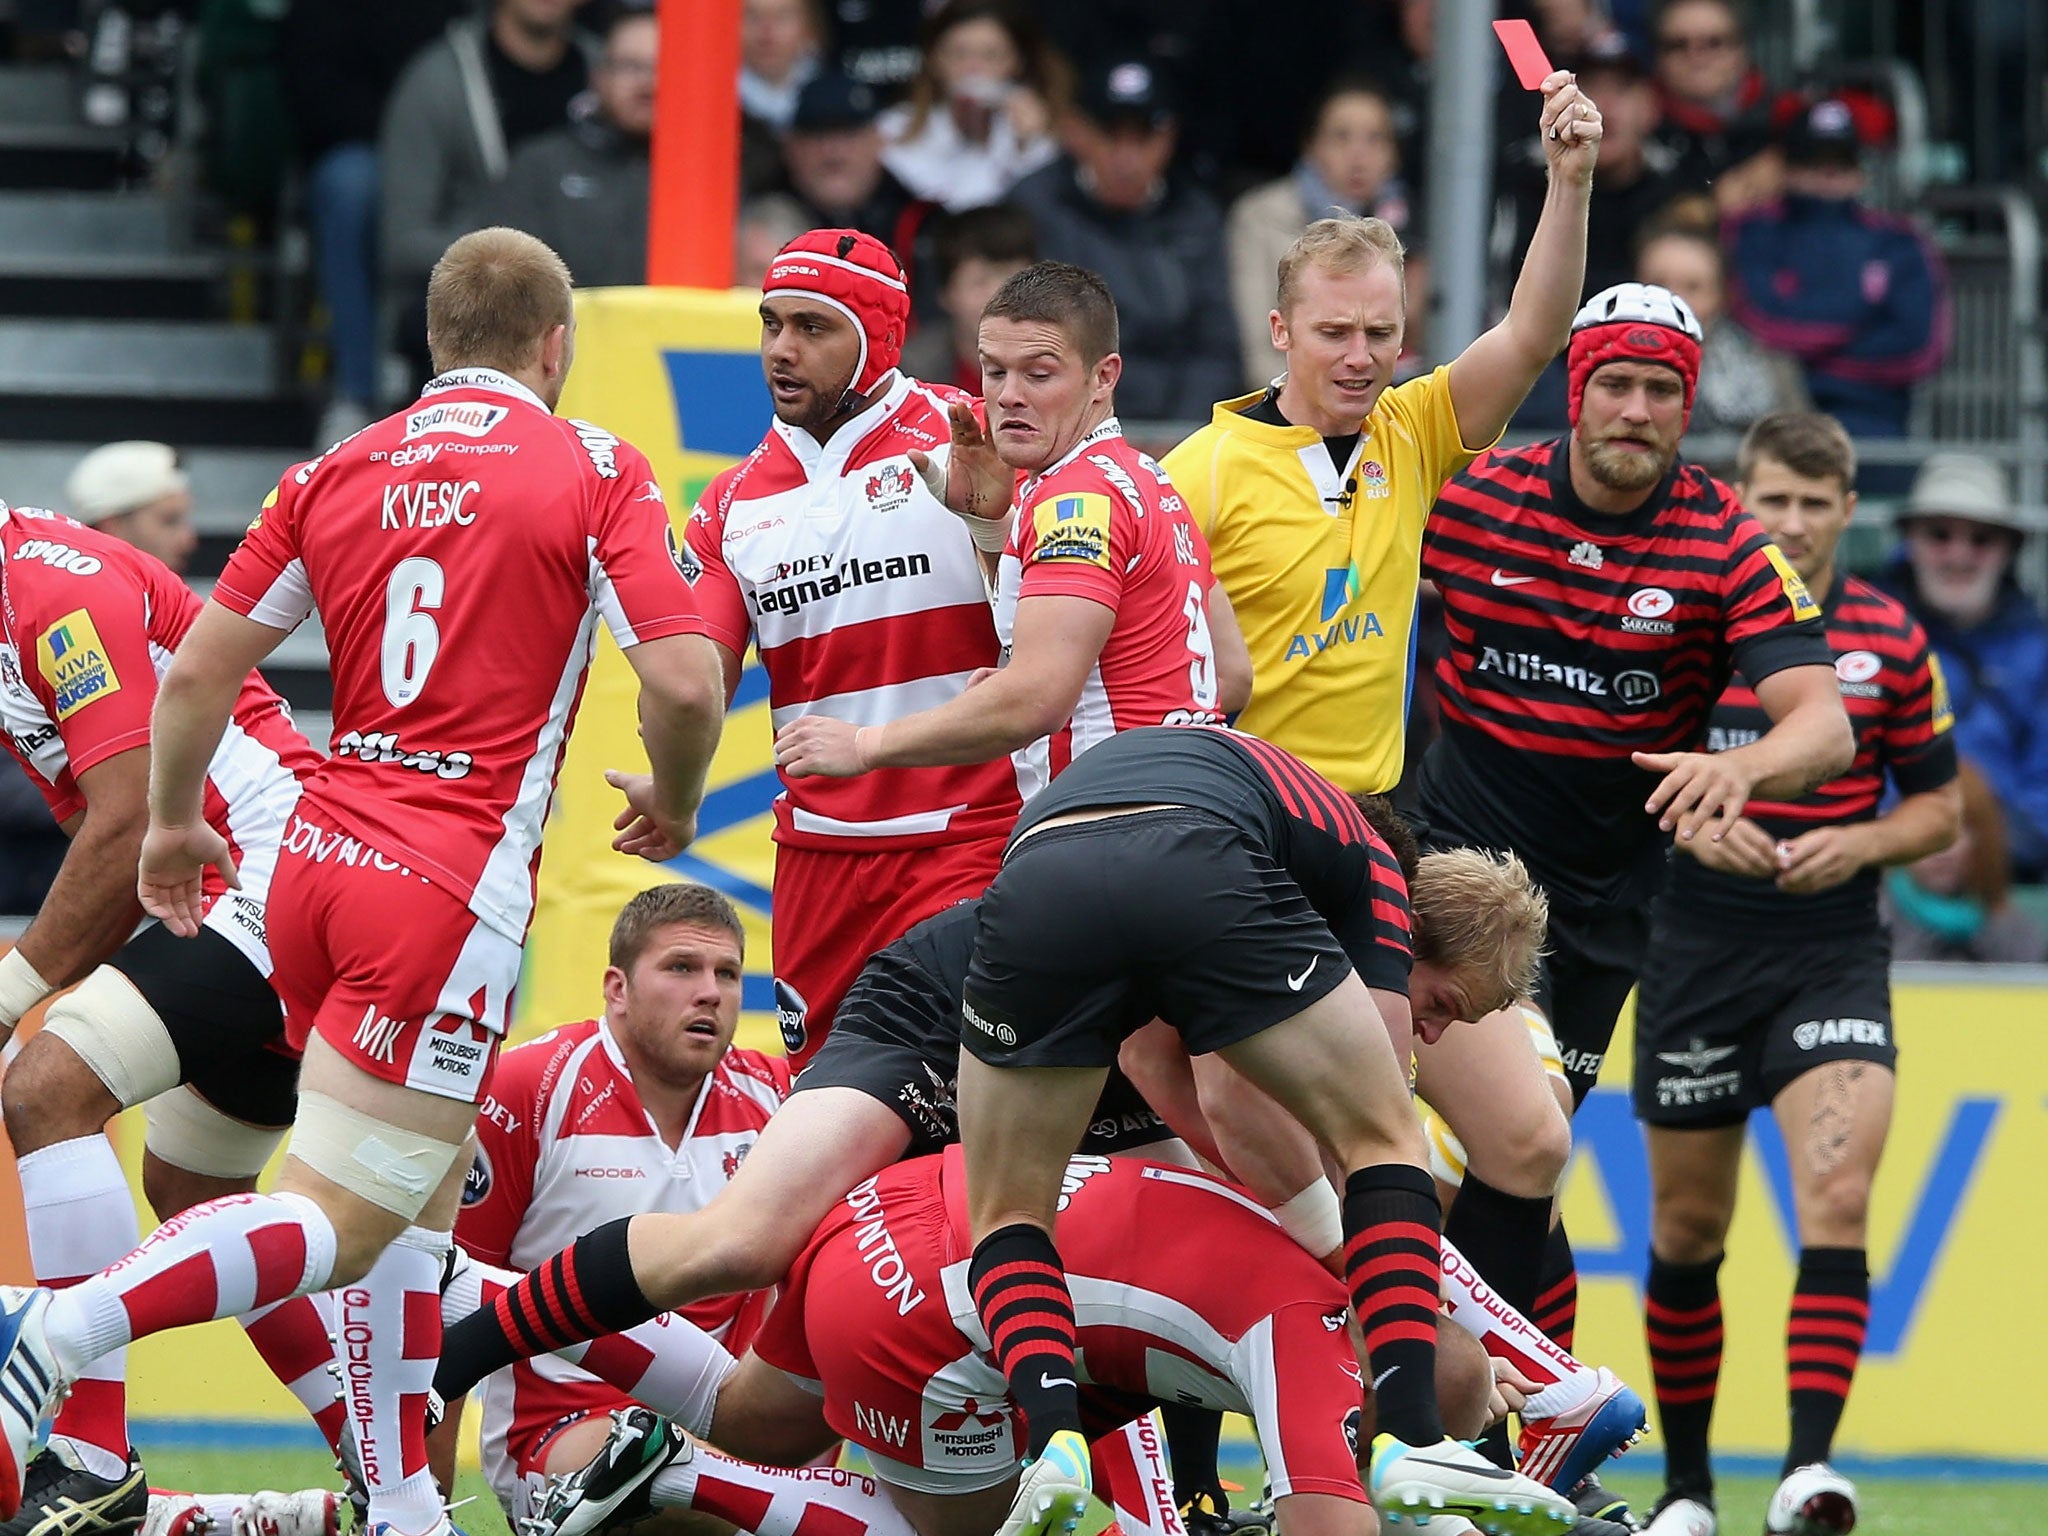 Gloucester's Nick Wood is shown a red card by referee Wayne Barnes during the Premiership game against Saracens